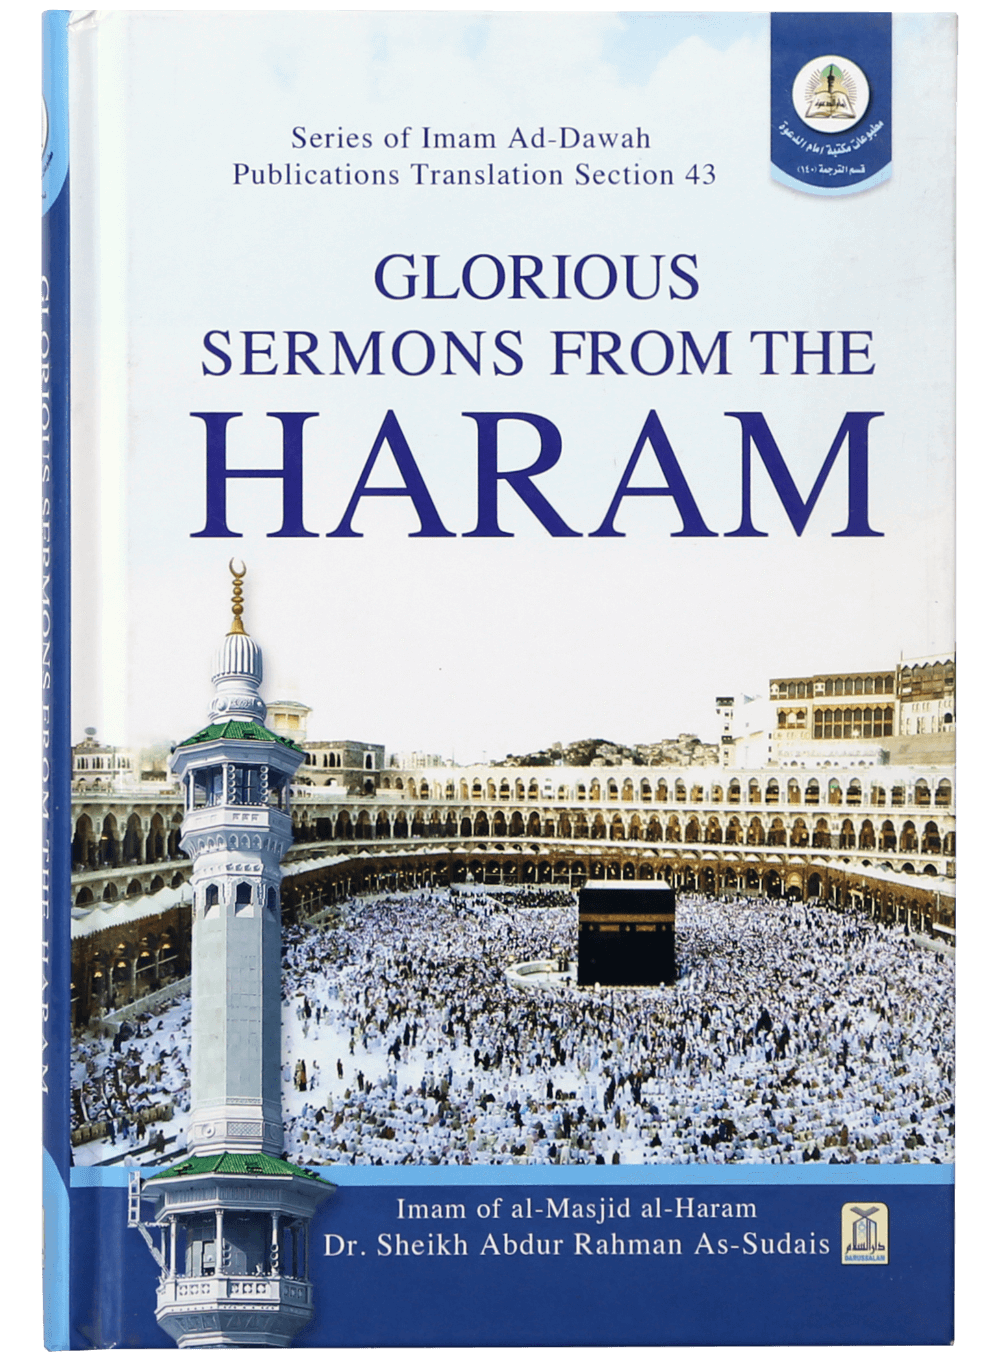 darussalam-2017-10-03-12-24-03glorious-serons-from-the-haram-(1)